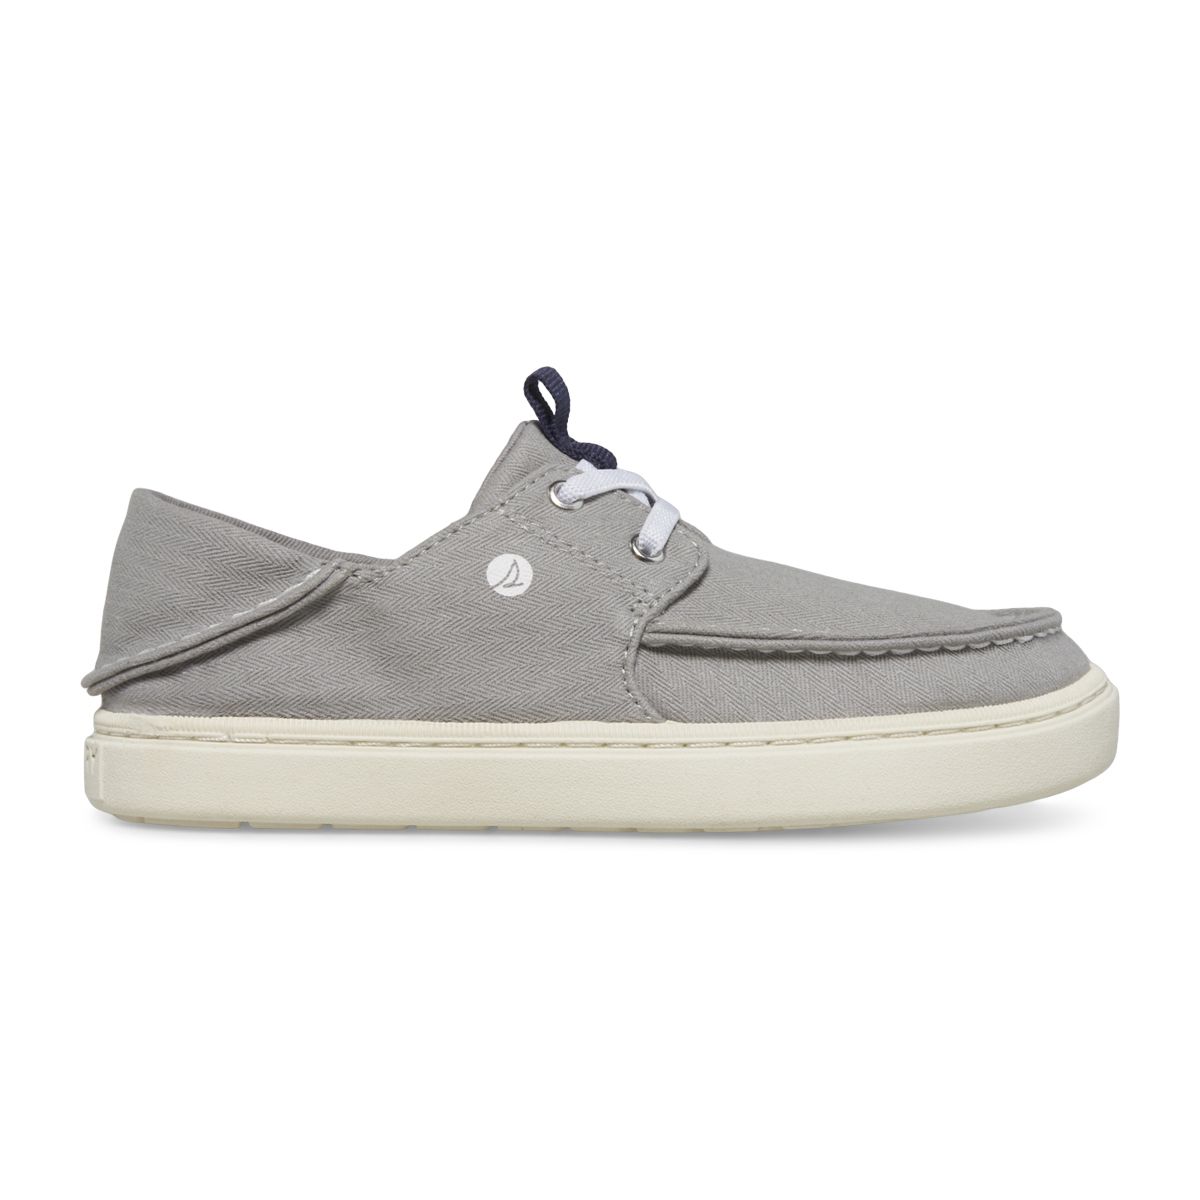 Big Kid's Offshore Lace Washable Sneaker Kids' Sneakers | Sperry